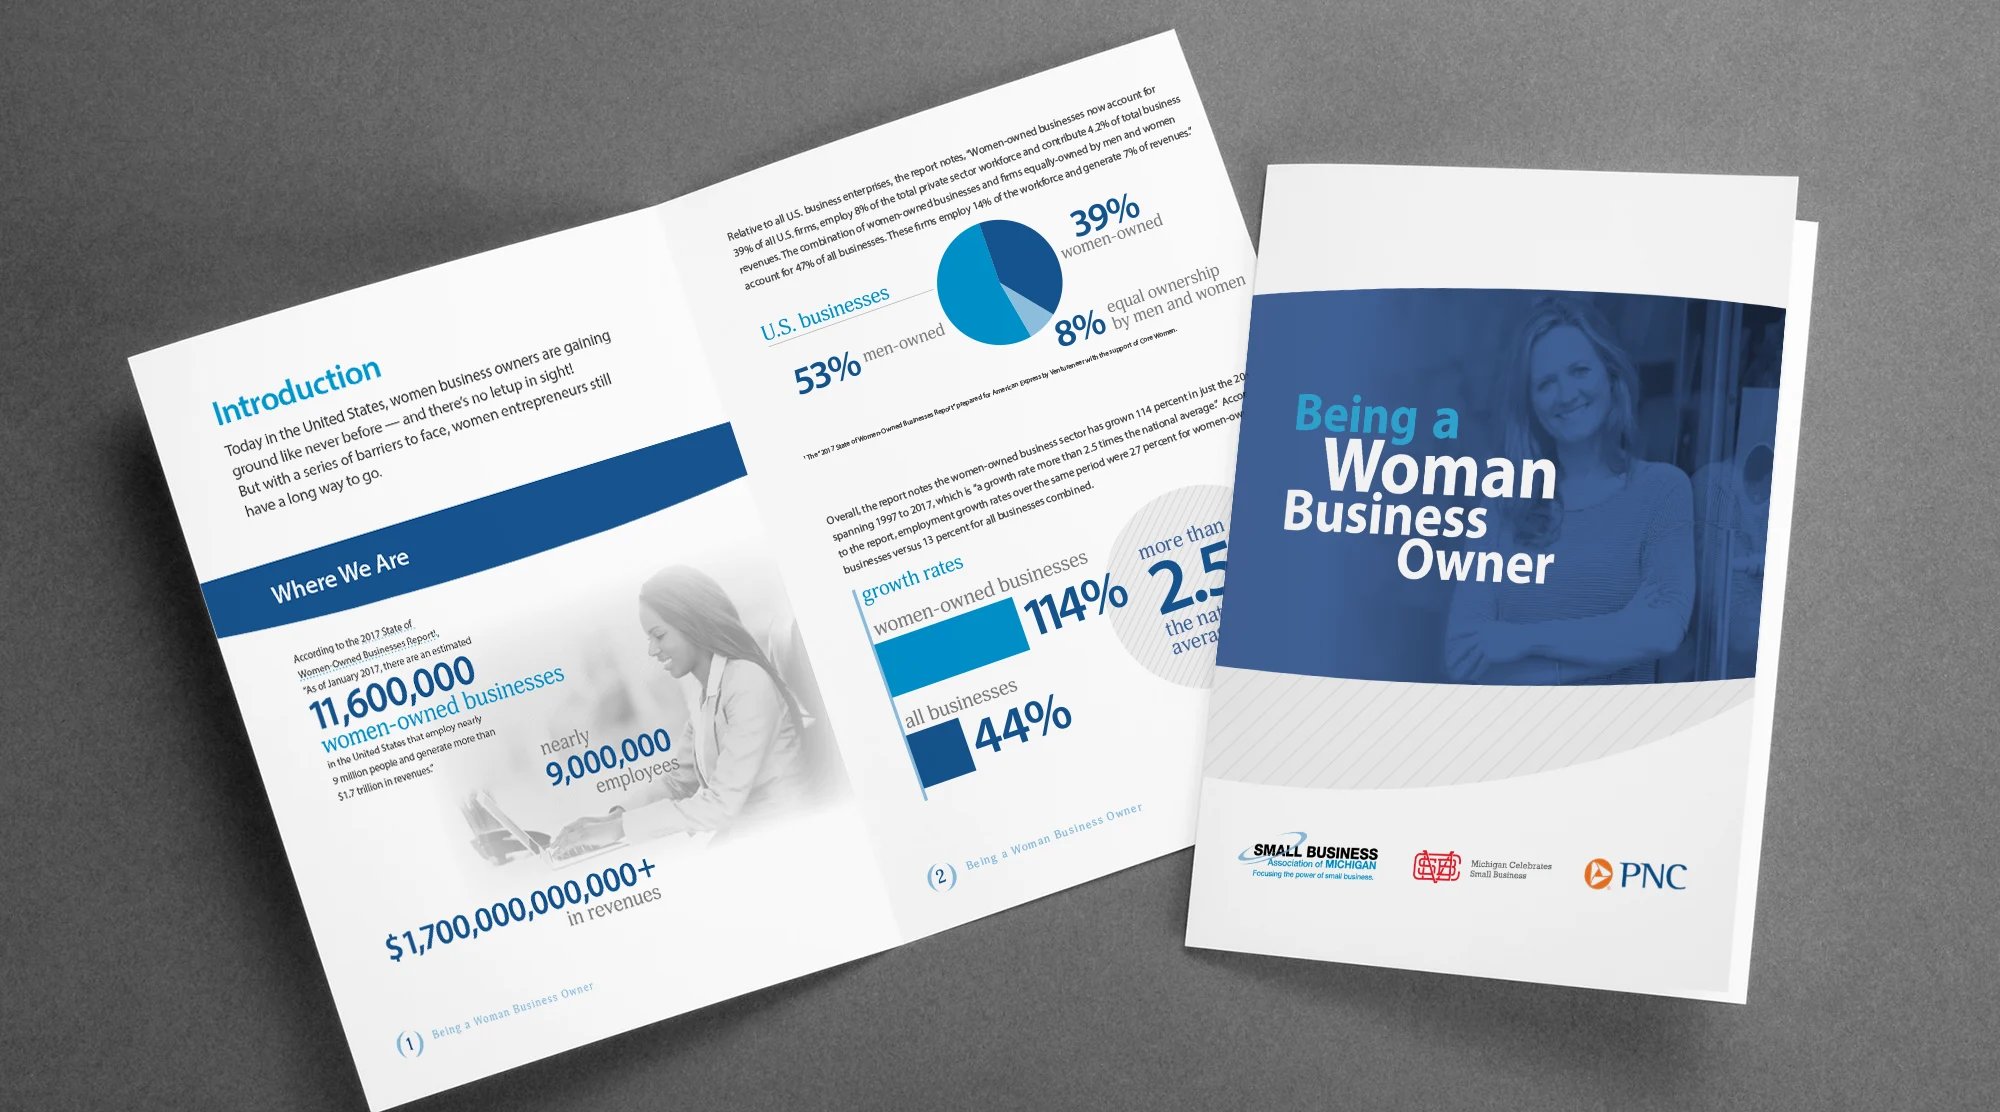 Being a Woman Business Owner cover and spread